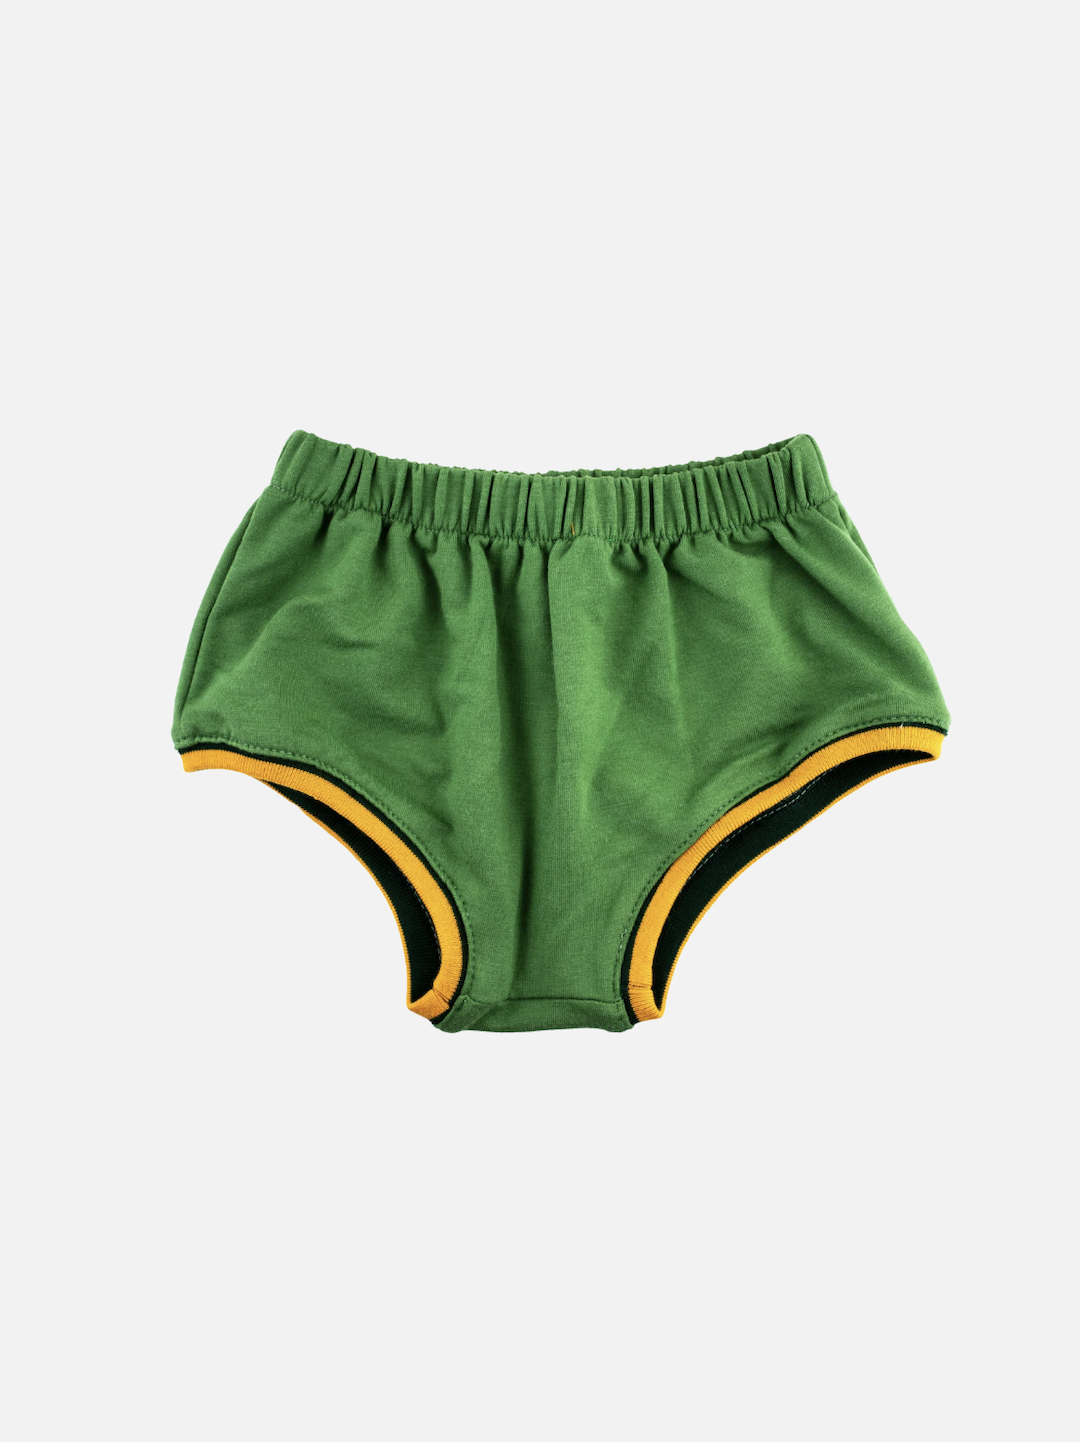 Mint green kids' bloomers with yellow trim at the leg holes